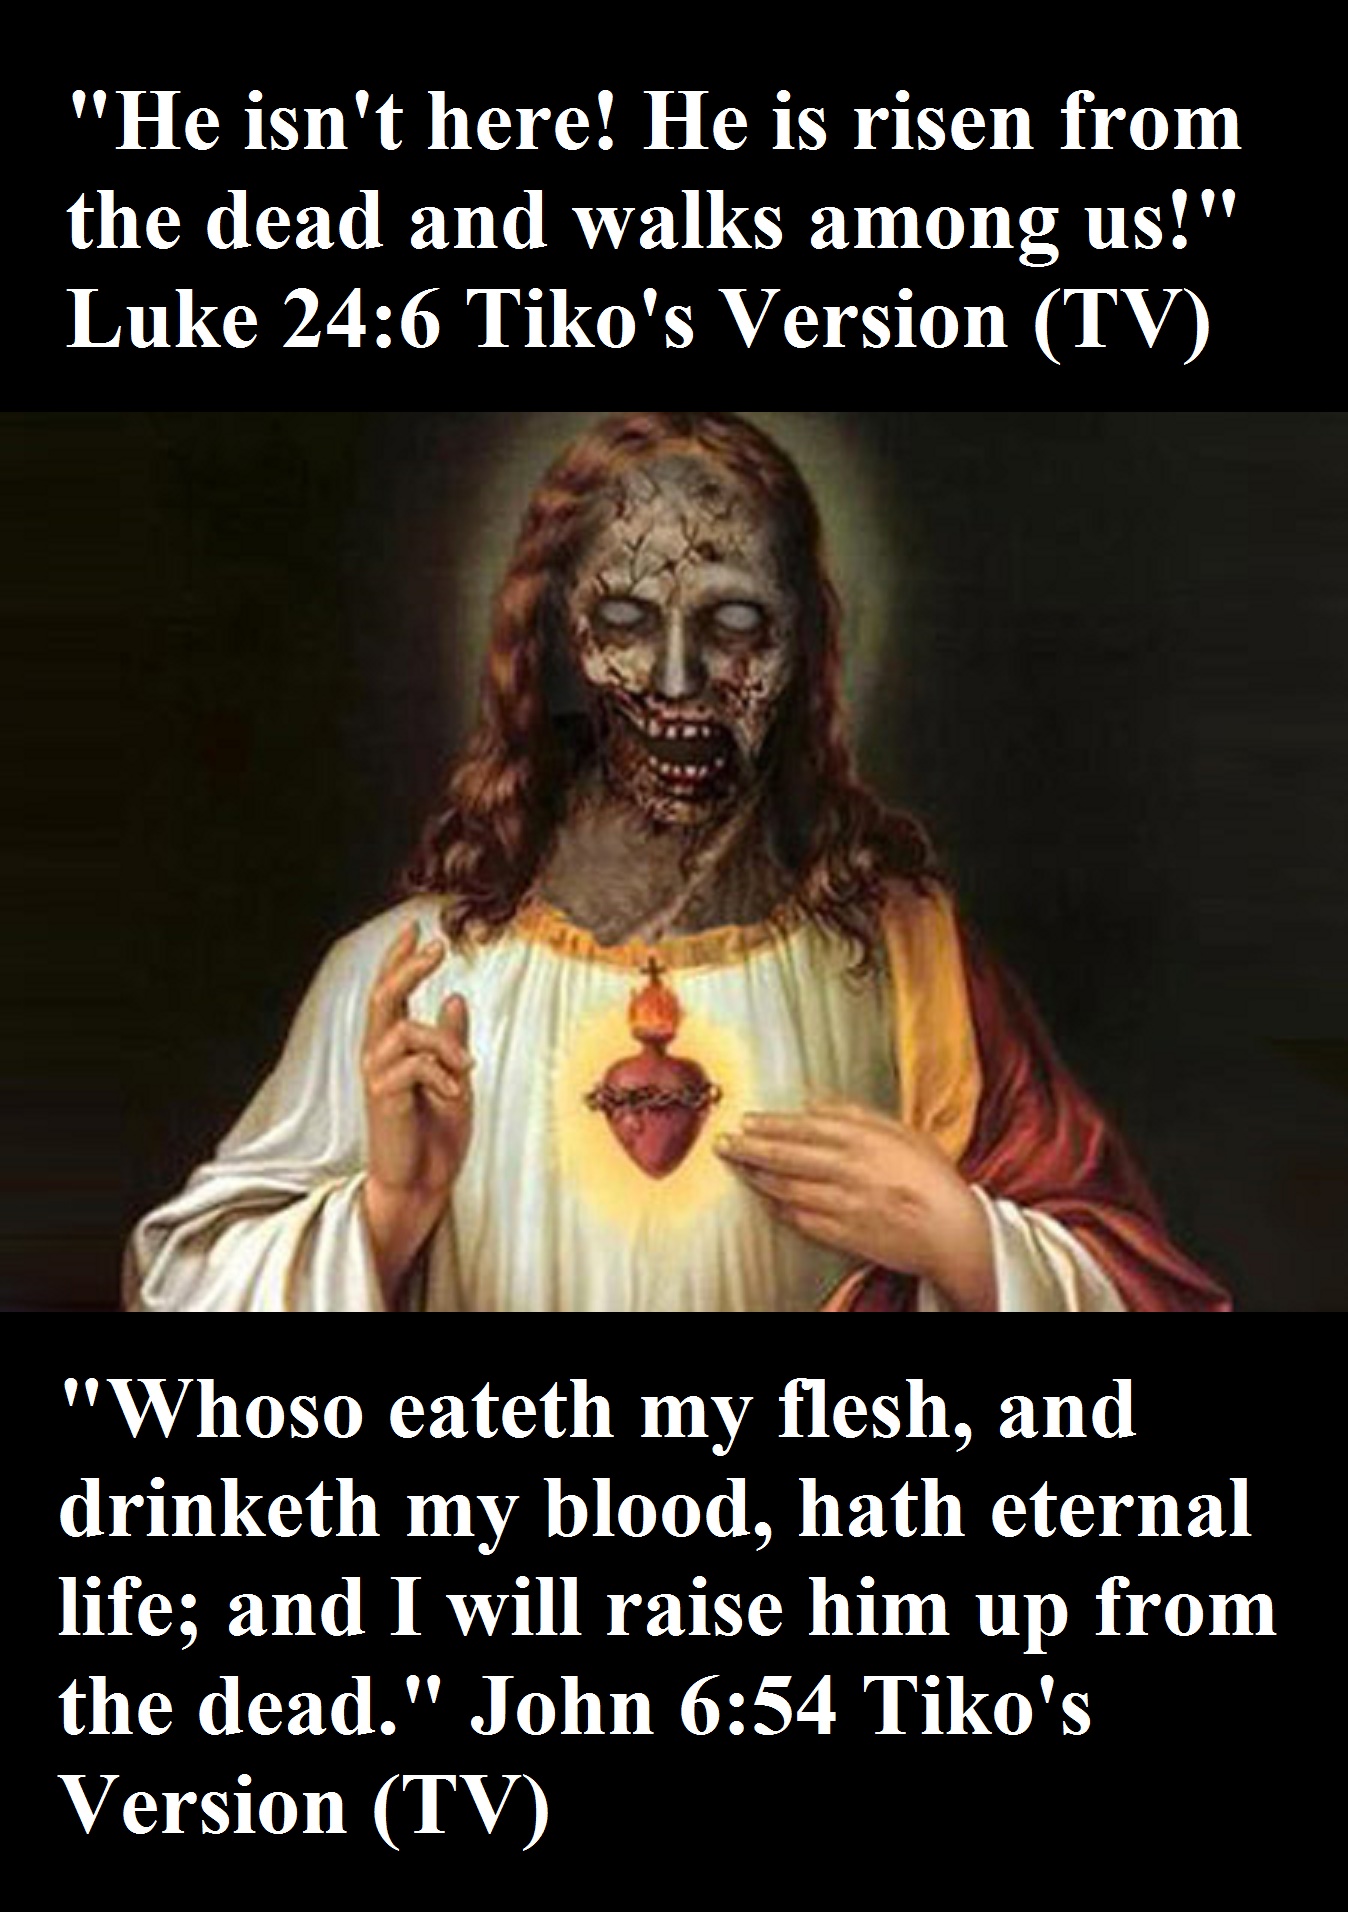 "Whoso eateth my flesh, and drinketh my blood, hath eternal life; and I will raise him up from the dead." John 6:54 Tiko's Version (TV)